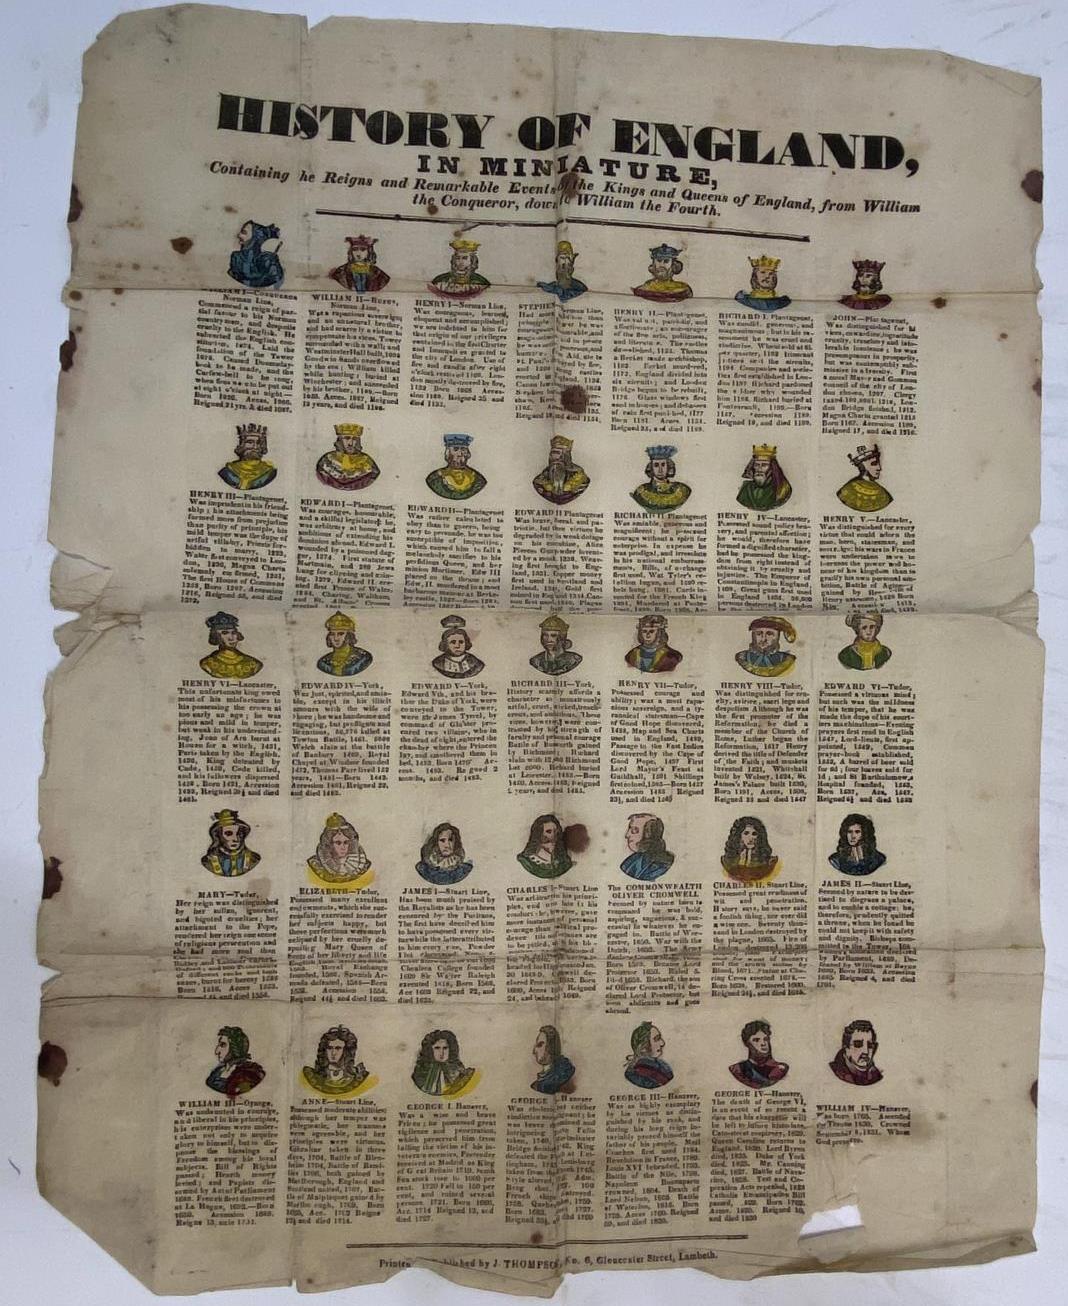 Broadside. History of England in Miniature, containing the Reigns and Remarkable Events of the Kings